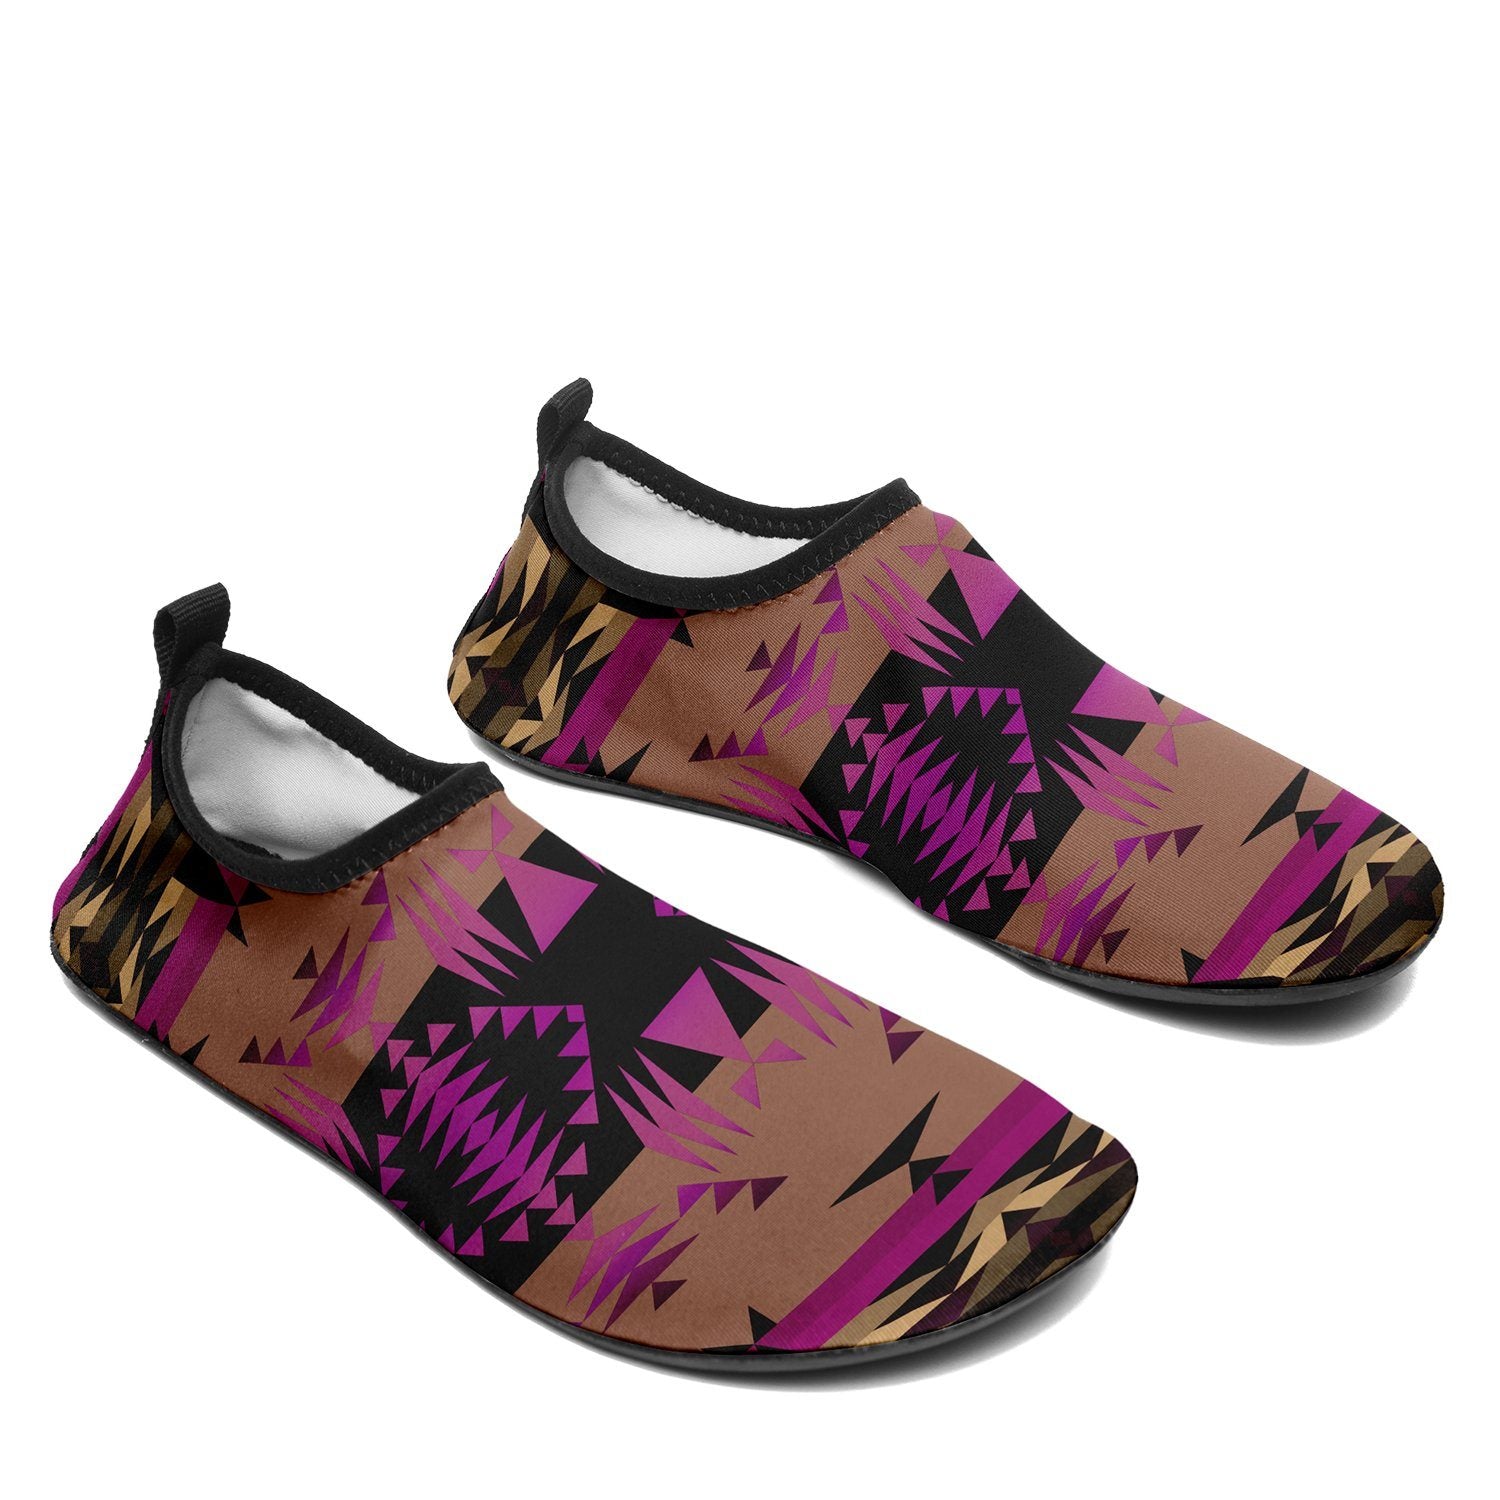 Between the Mountains Berry Sockamoccs Slip On Shoes 49 Dzine 